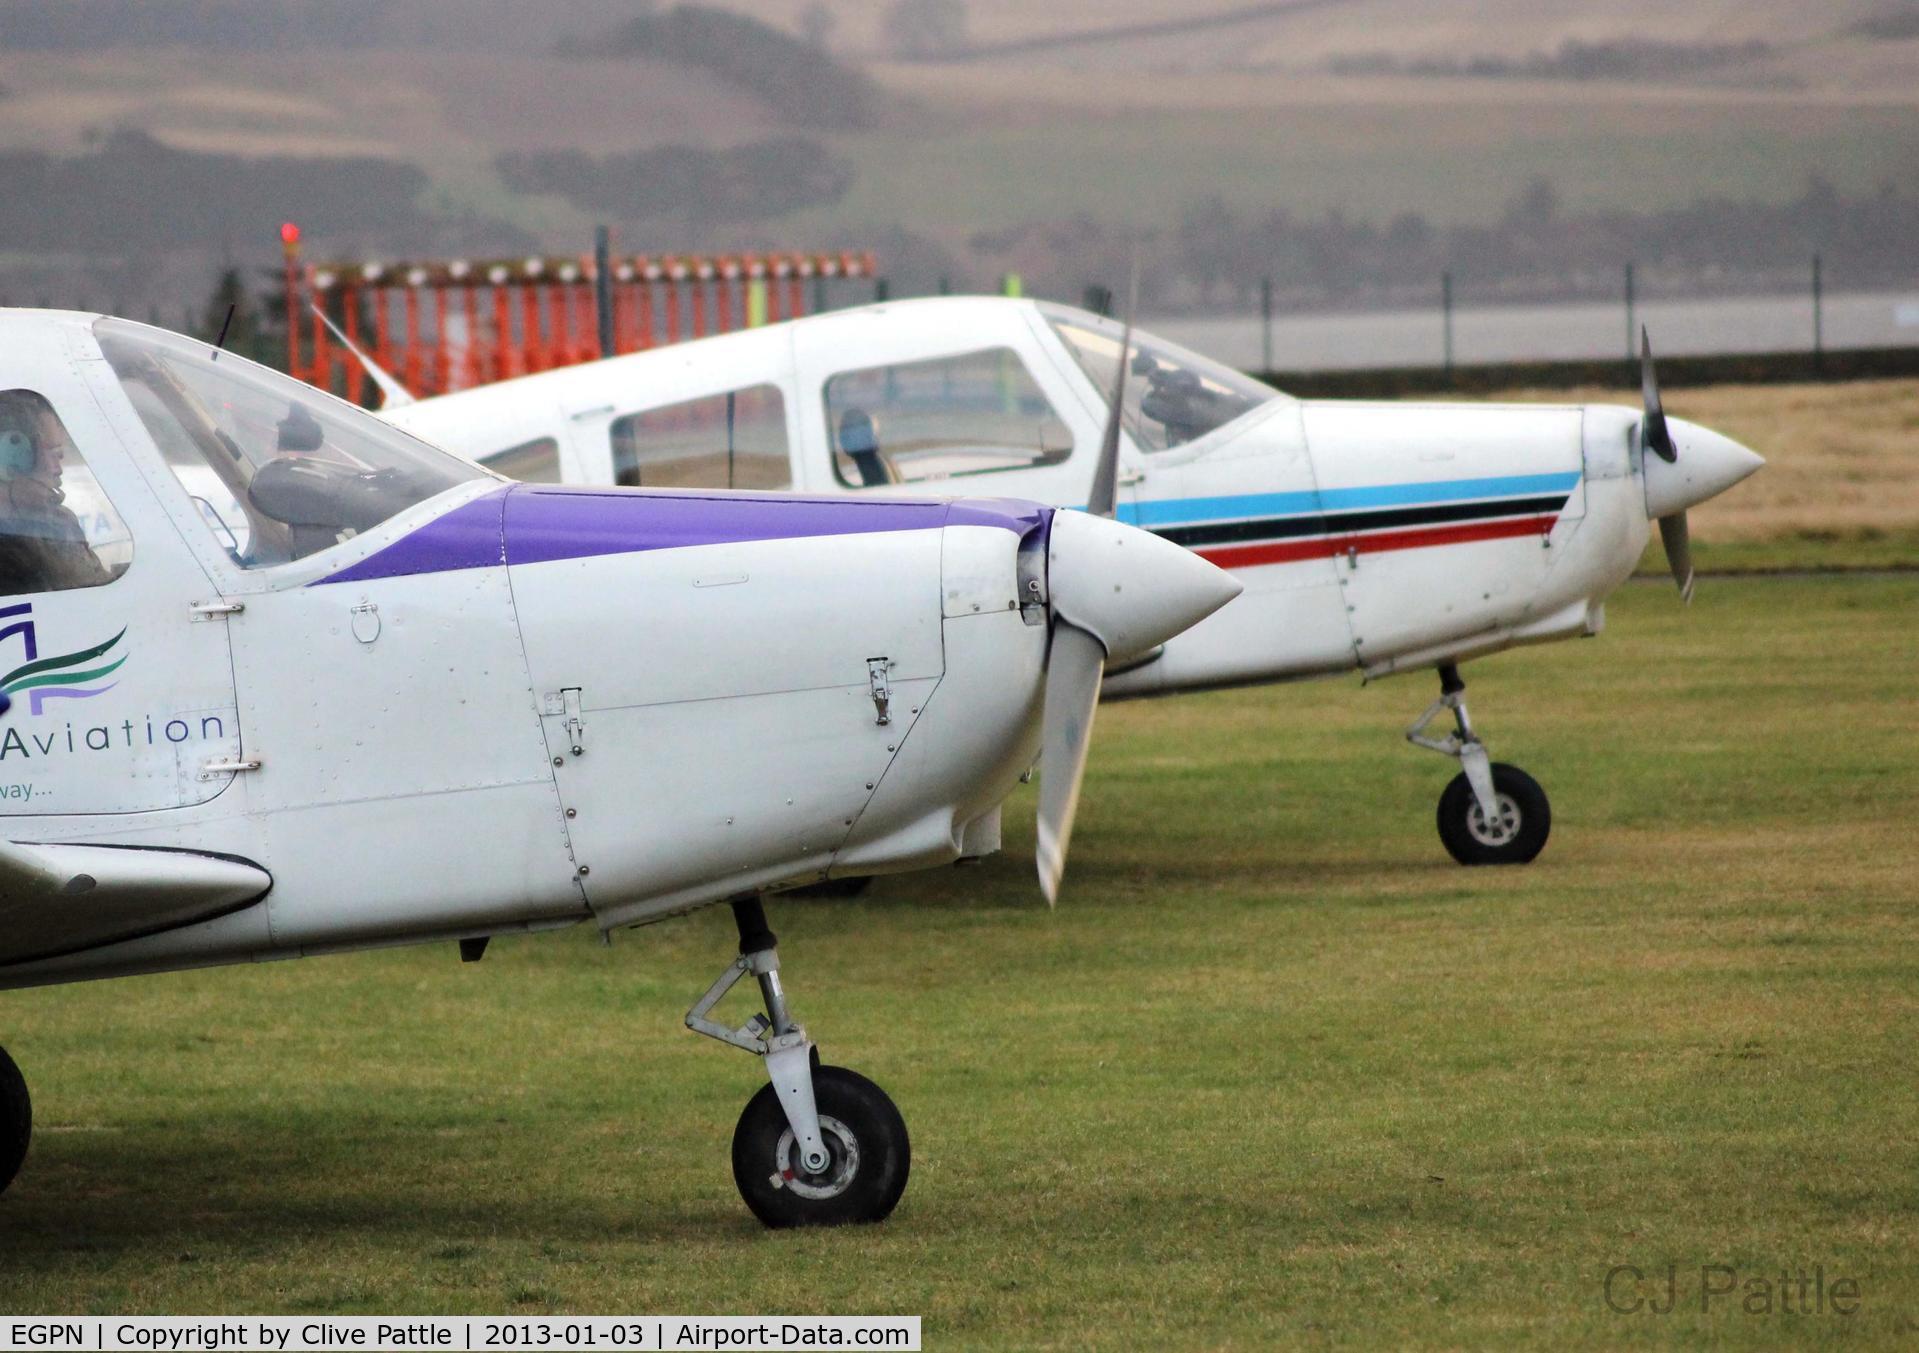 Dundee Airport, Dundee, Scotland United Kingdom (EGPN) - Tayside Aviation Cherokee close-up at Dundee